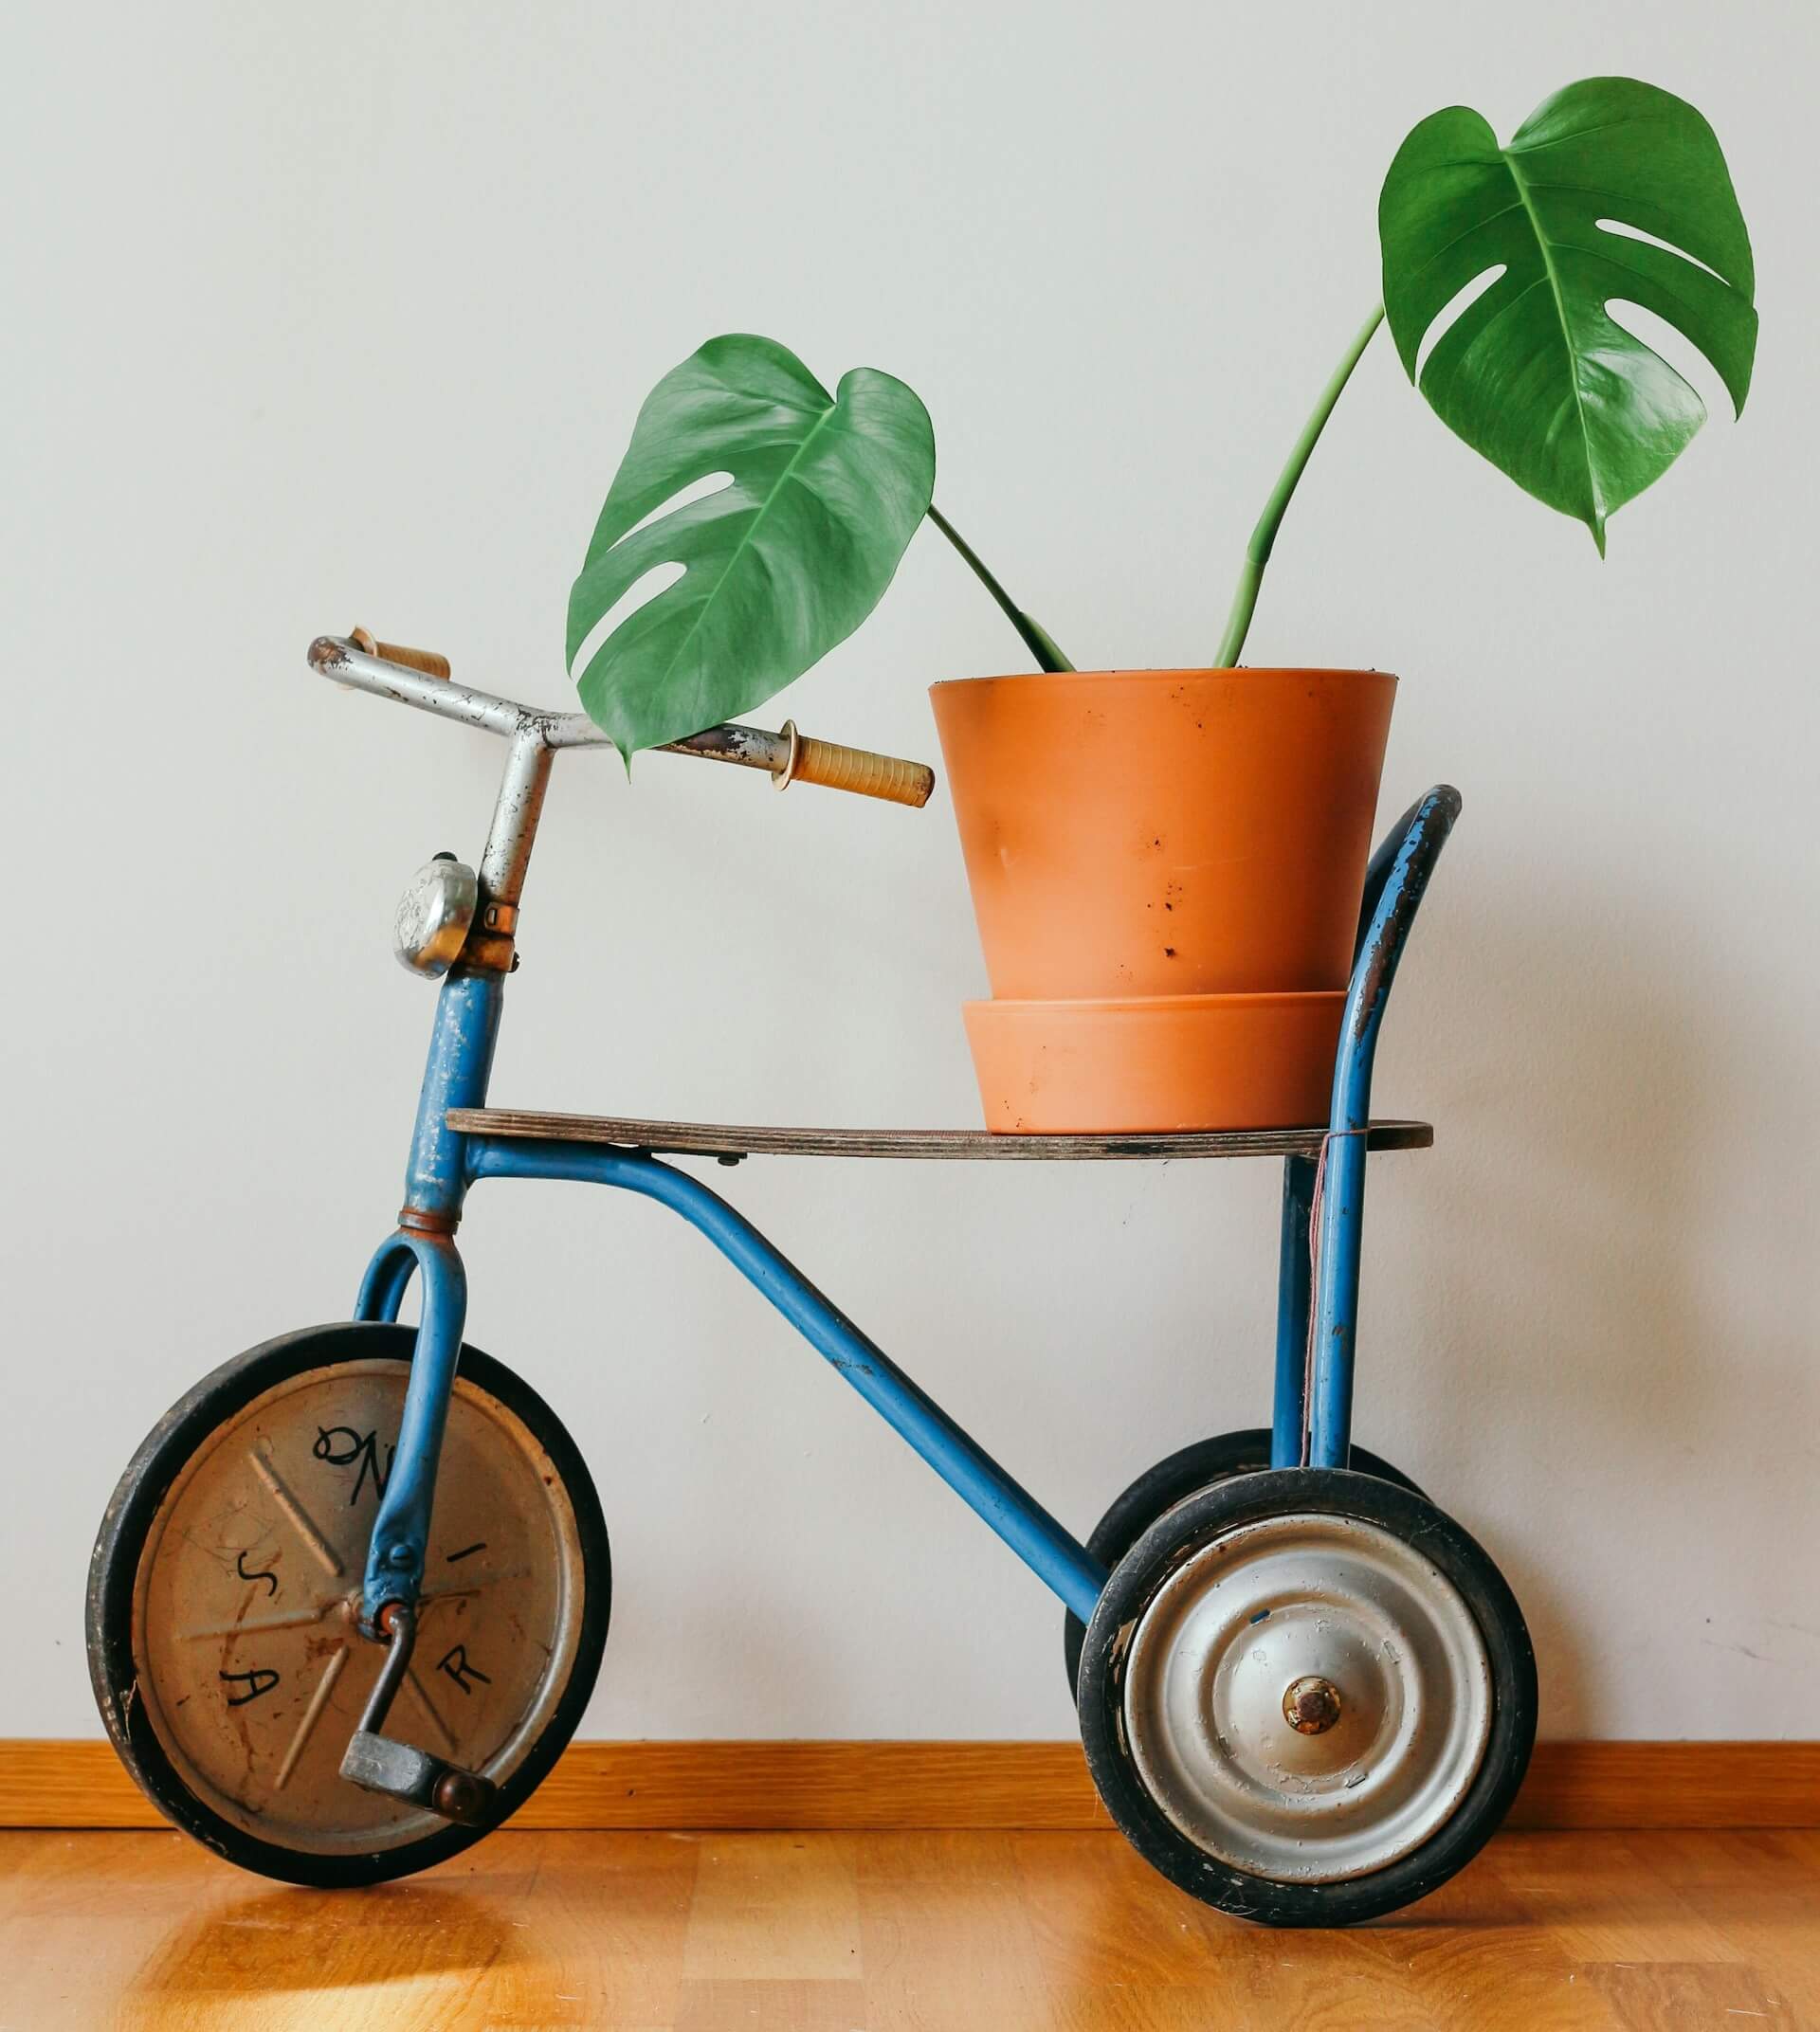 Monstera on a bicycle